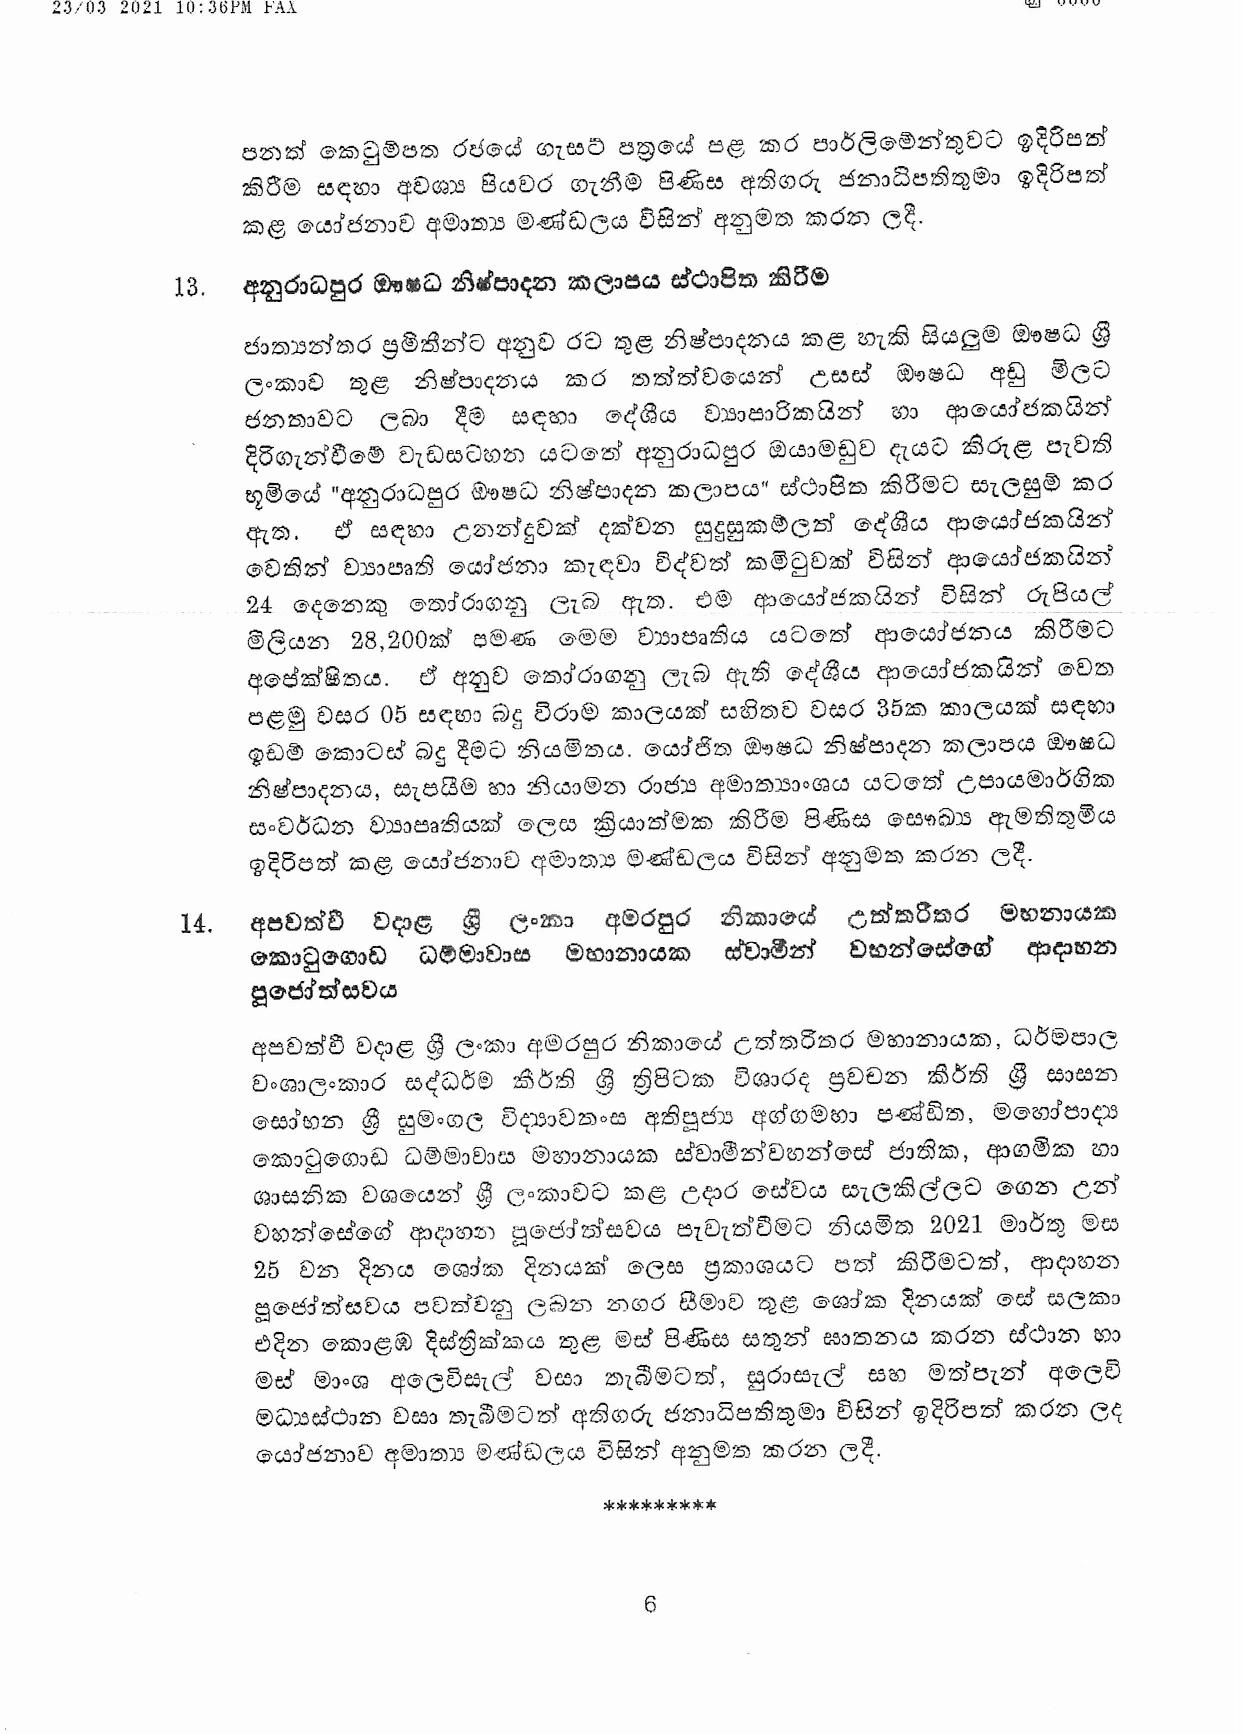 Cabinet Decision on 23.03.2021 page 006